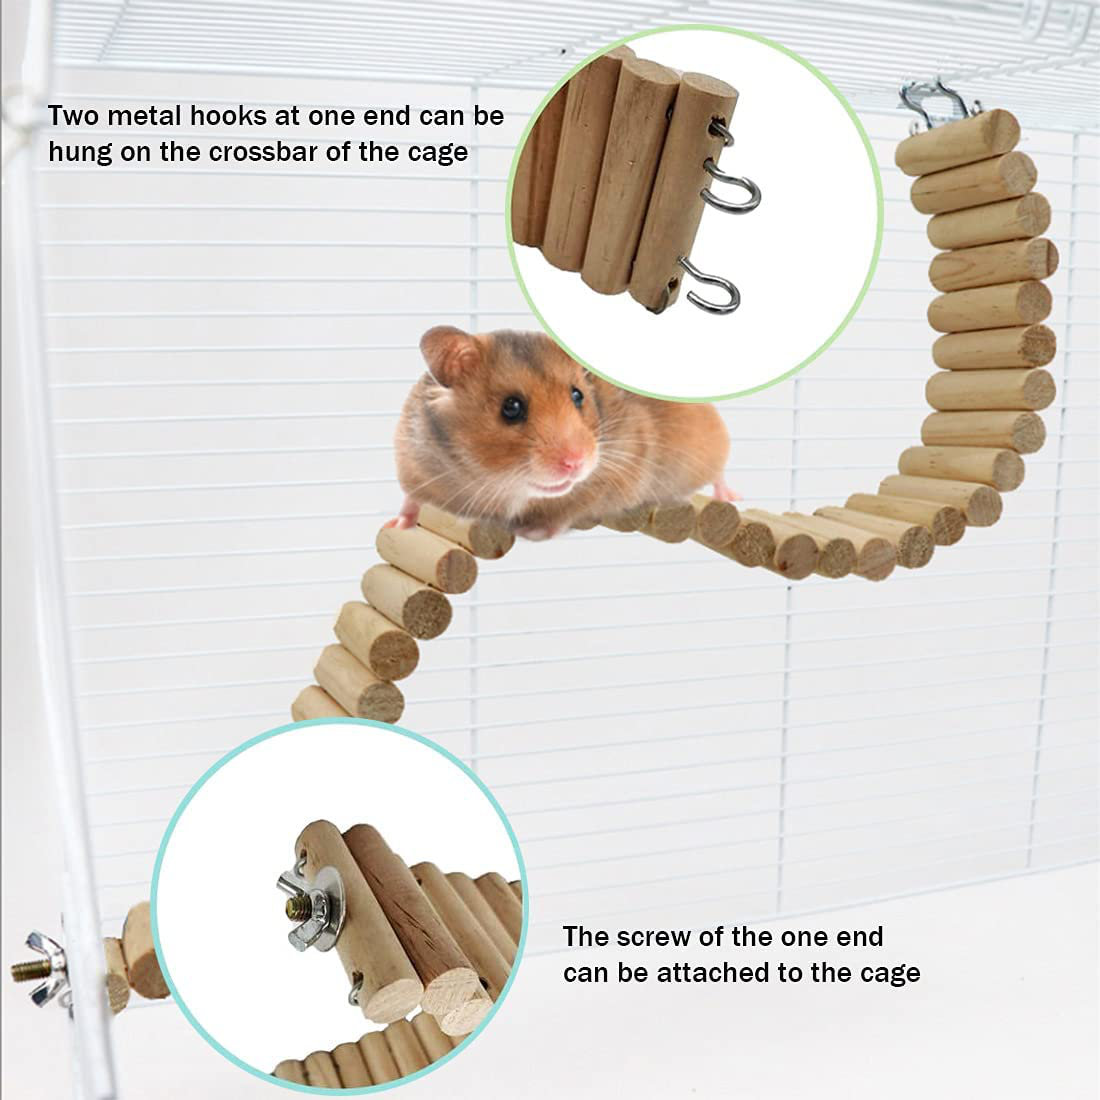 Hamiledyi Hamster Suspension Bridge,Natural Wooden Rat Bendable Ladder Mouse Long Climbing Ladder Rodents Chew Toys Cage Accessories for Dwarf Hamster Mice Gerbil Chinchilla Chipmunk